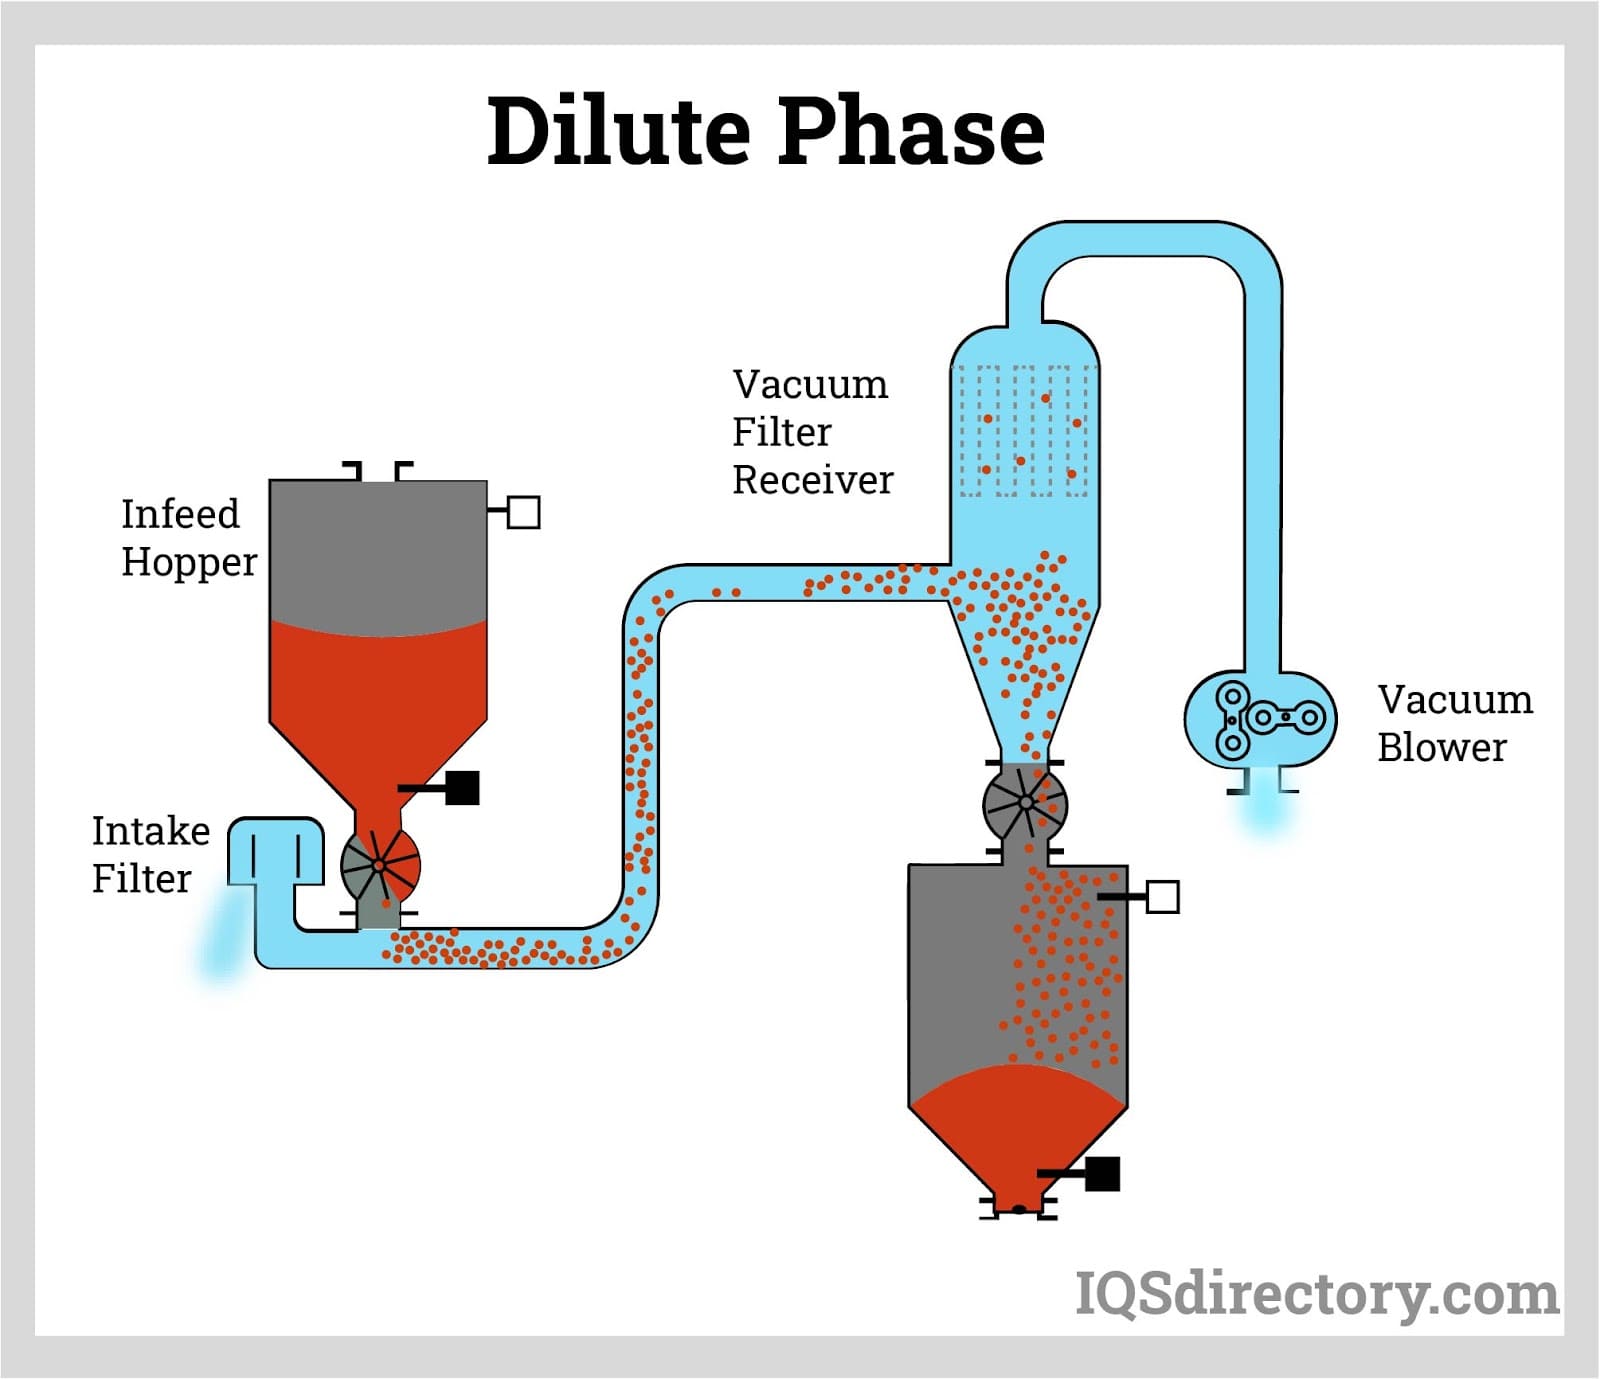 dilute phase